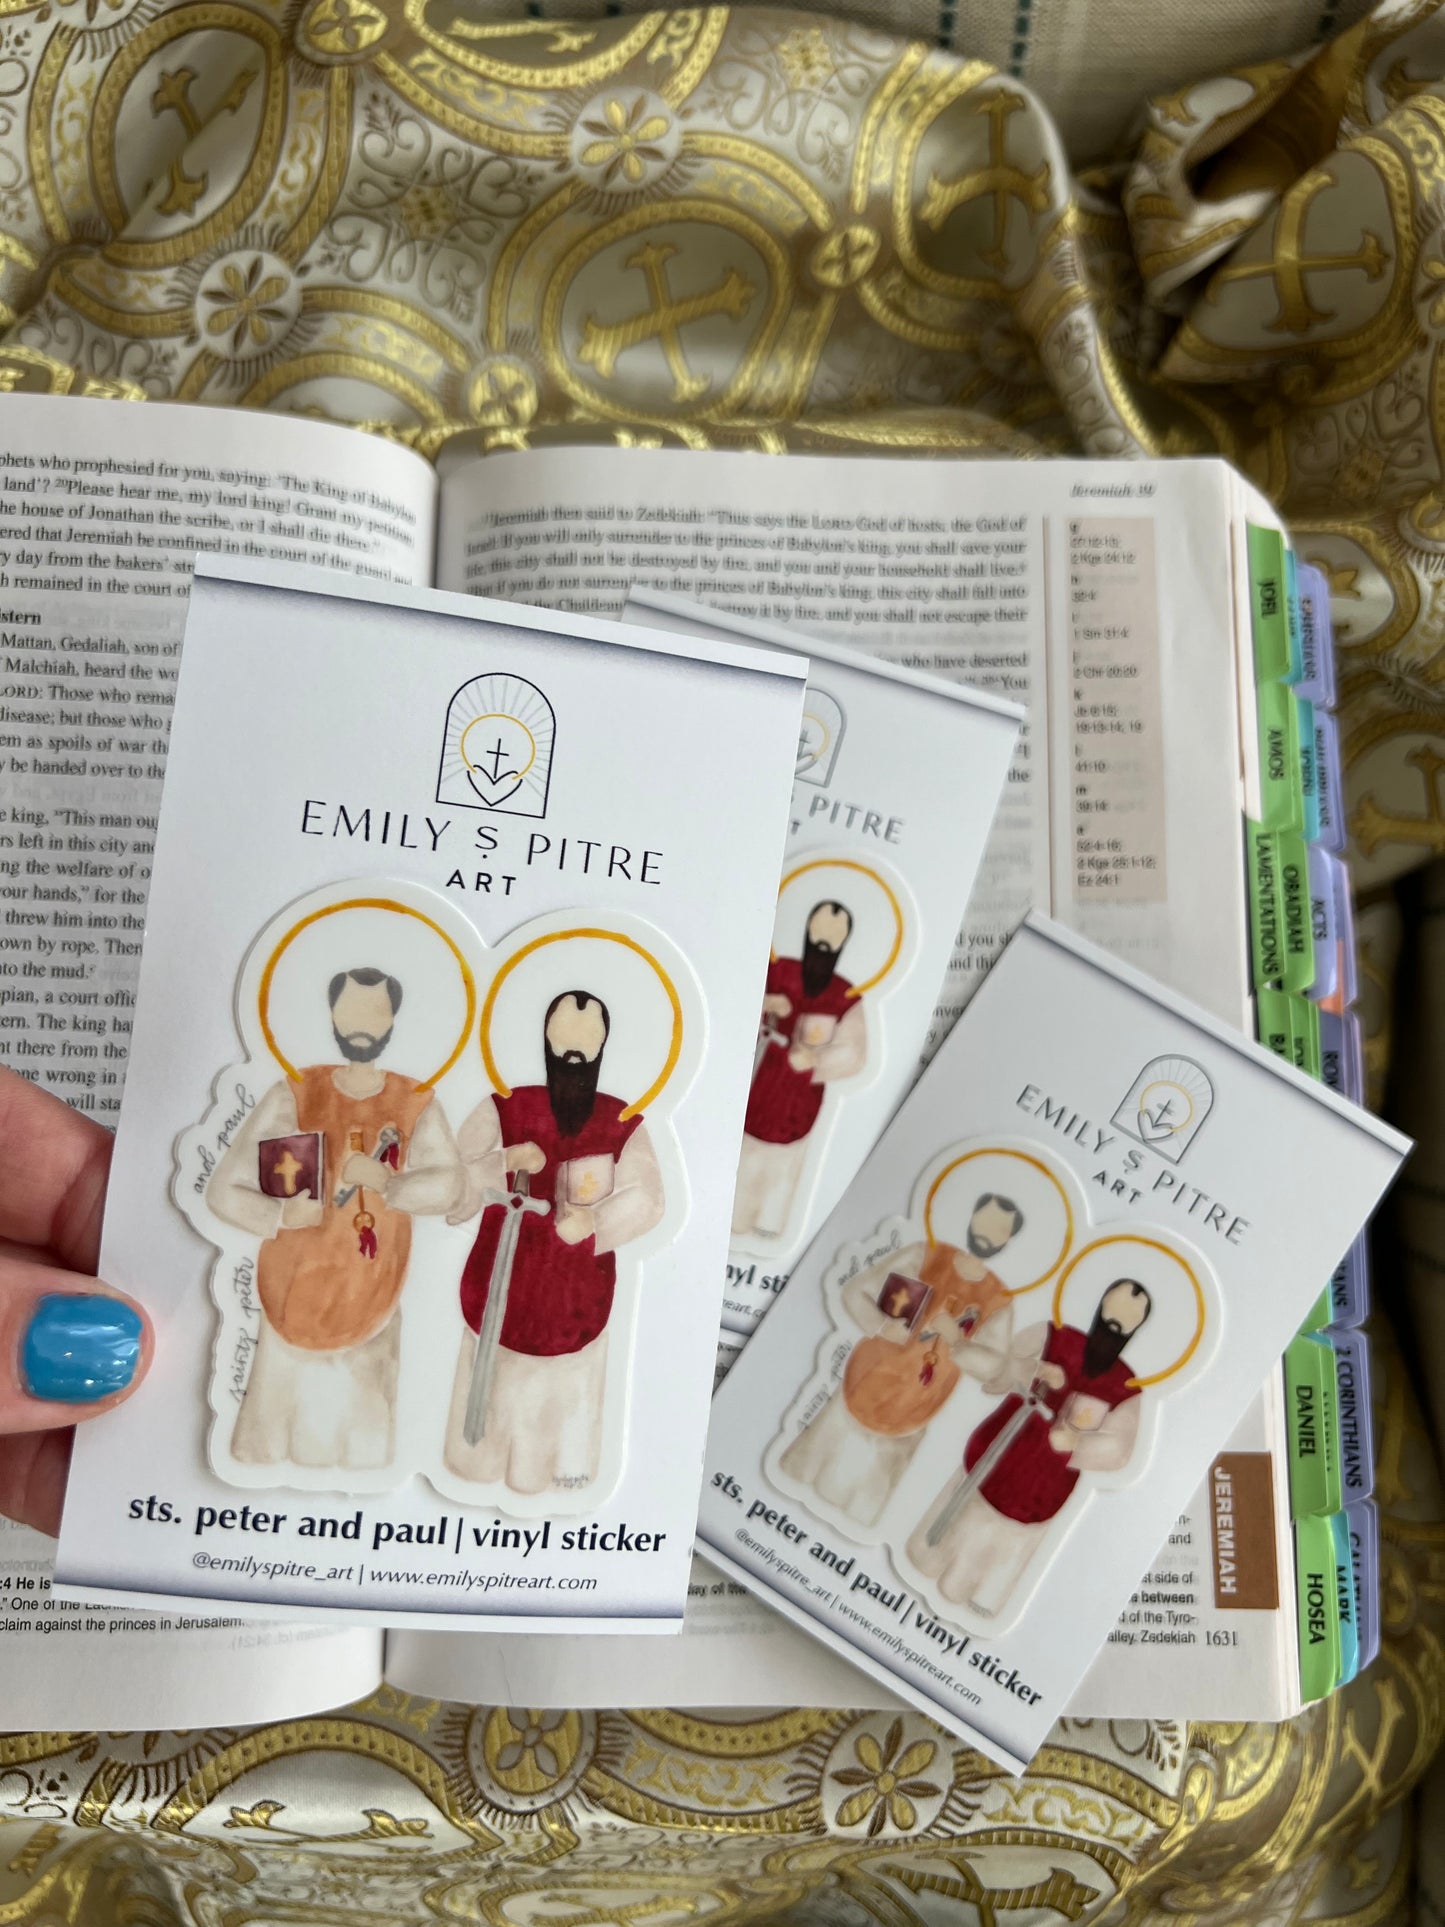 Sts. Peter and Paul Sticker